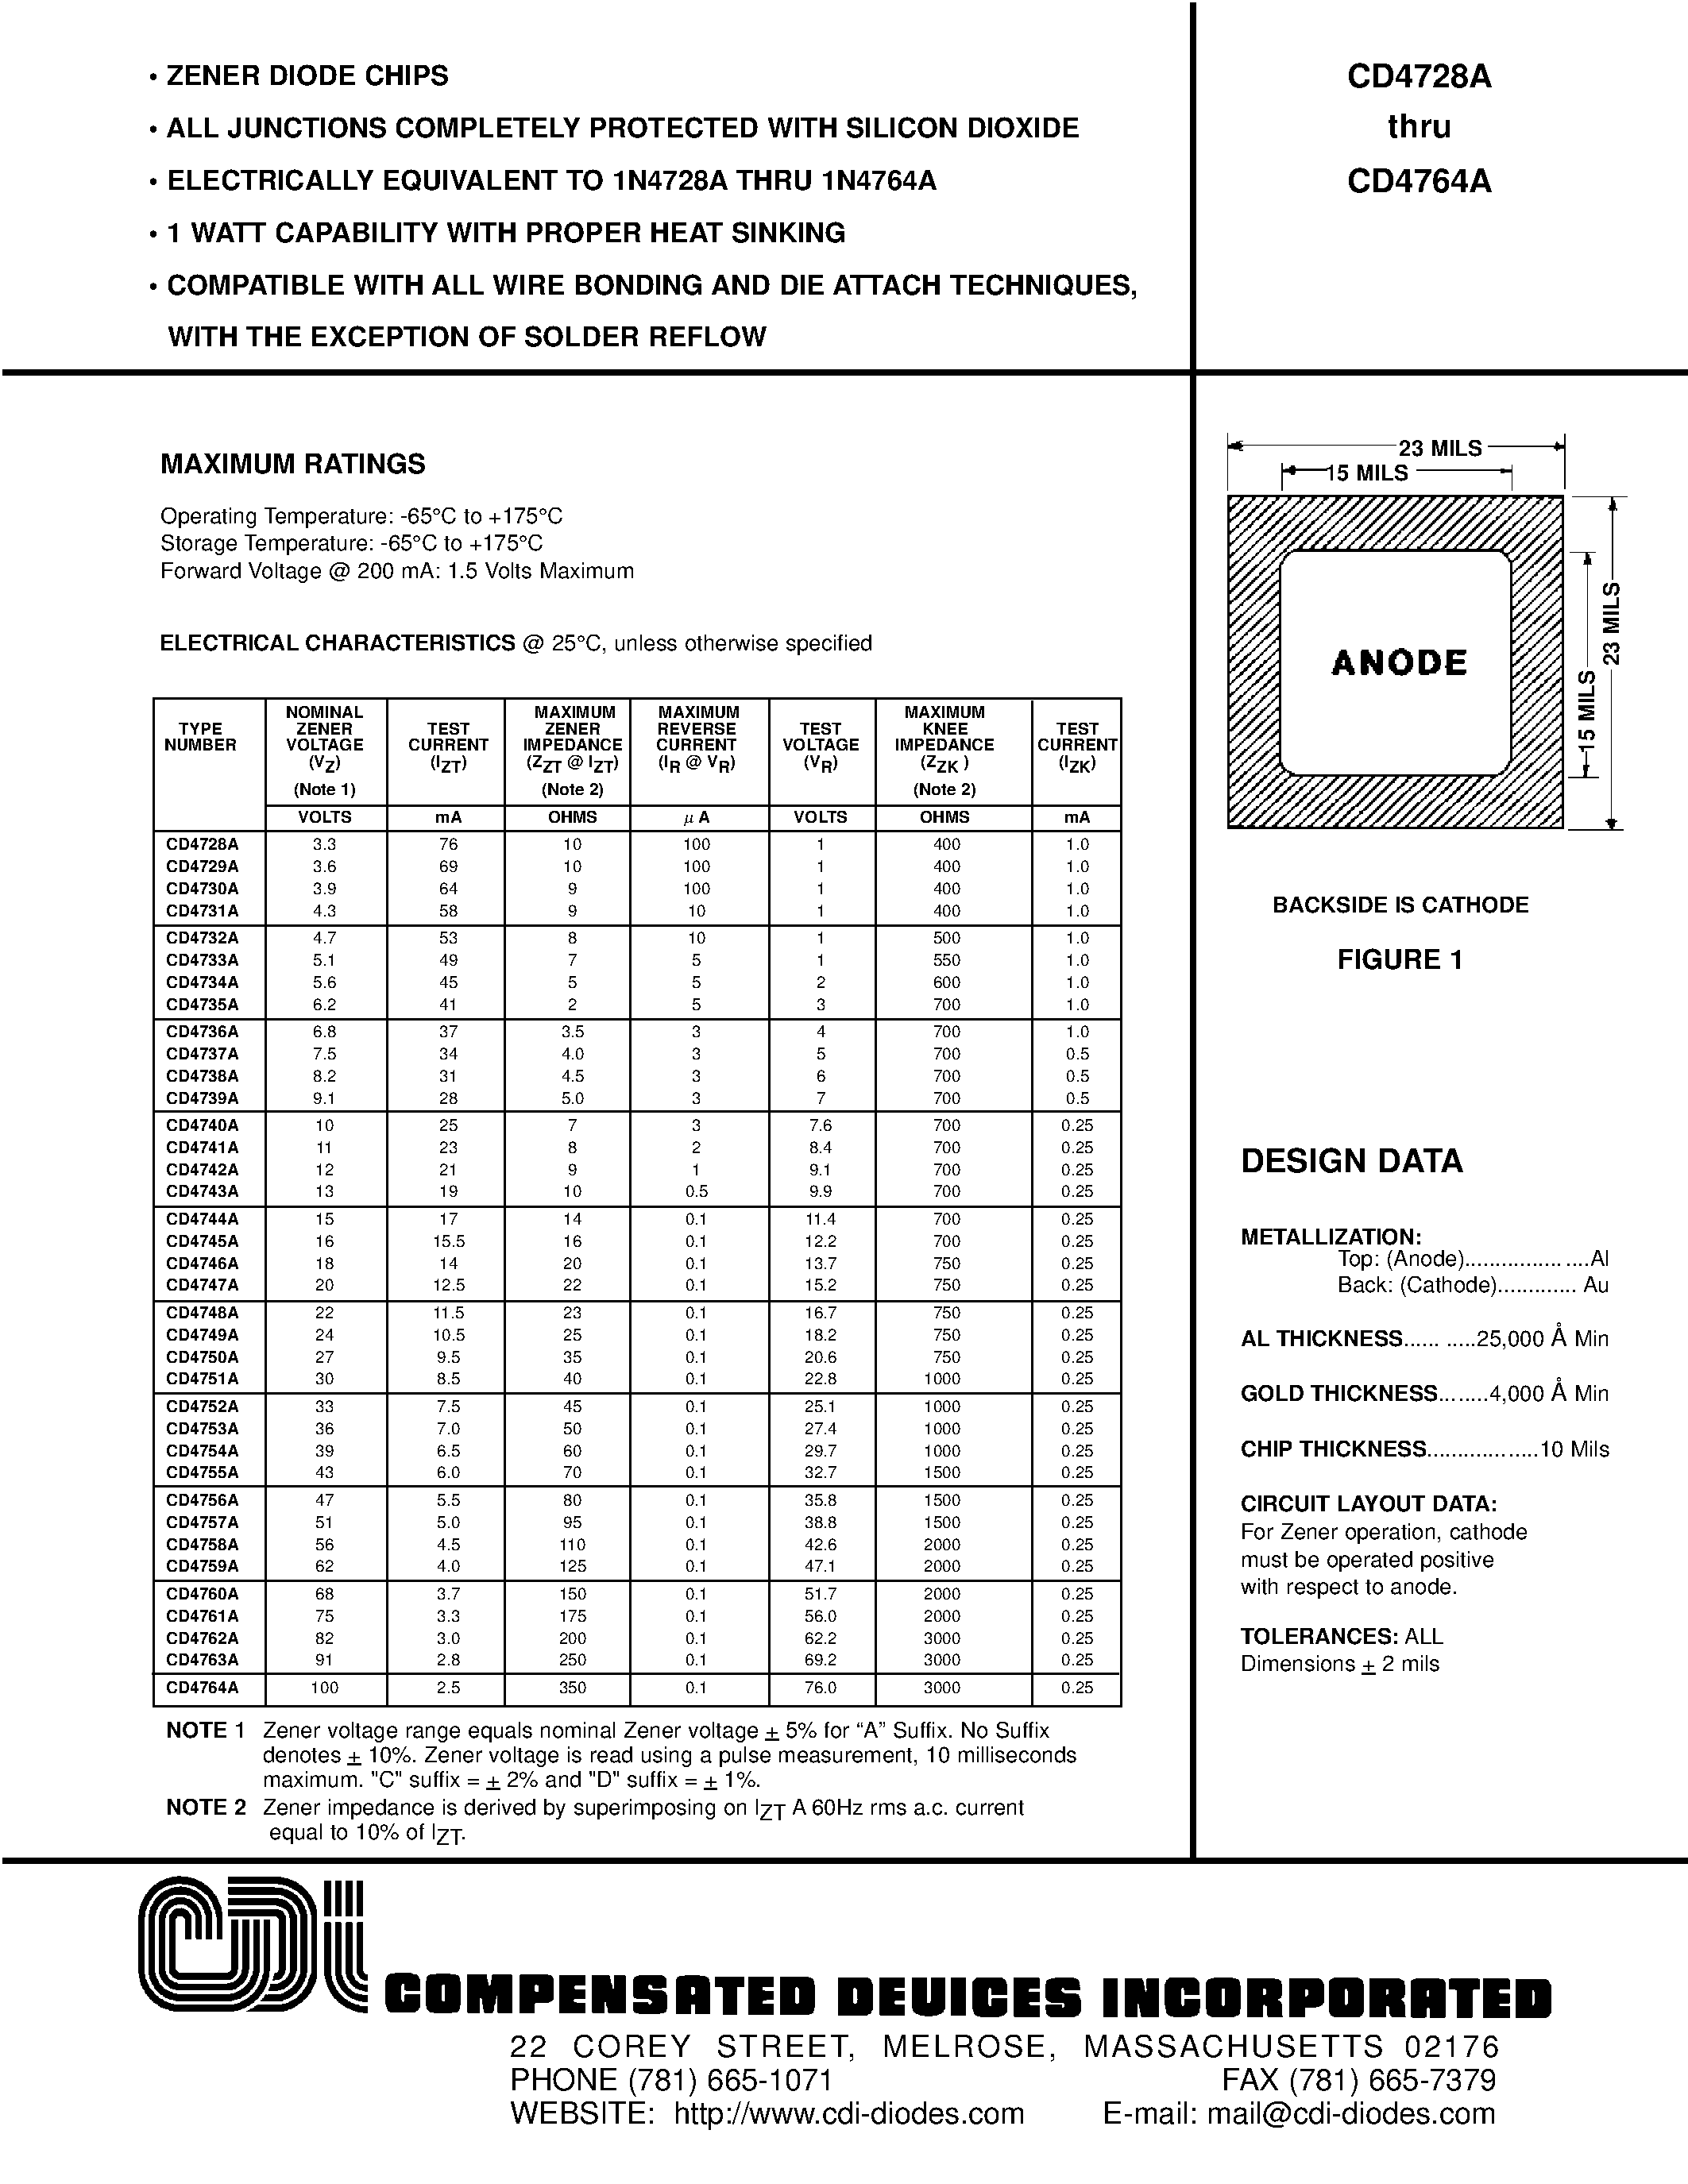 Datasheet CD4752A - ZENER DIODE CHIPS page 1